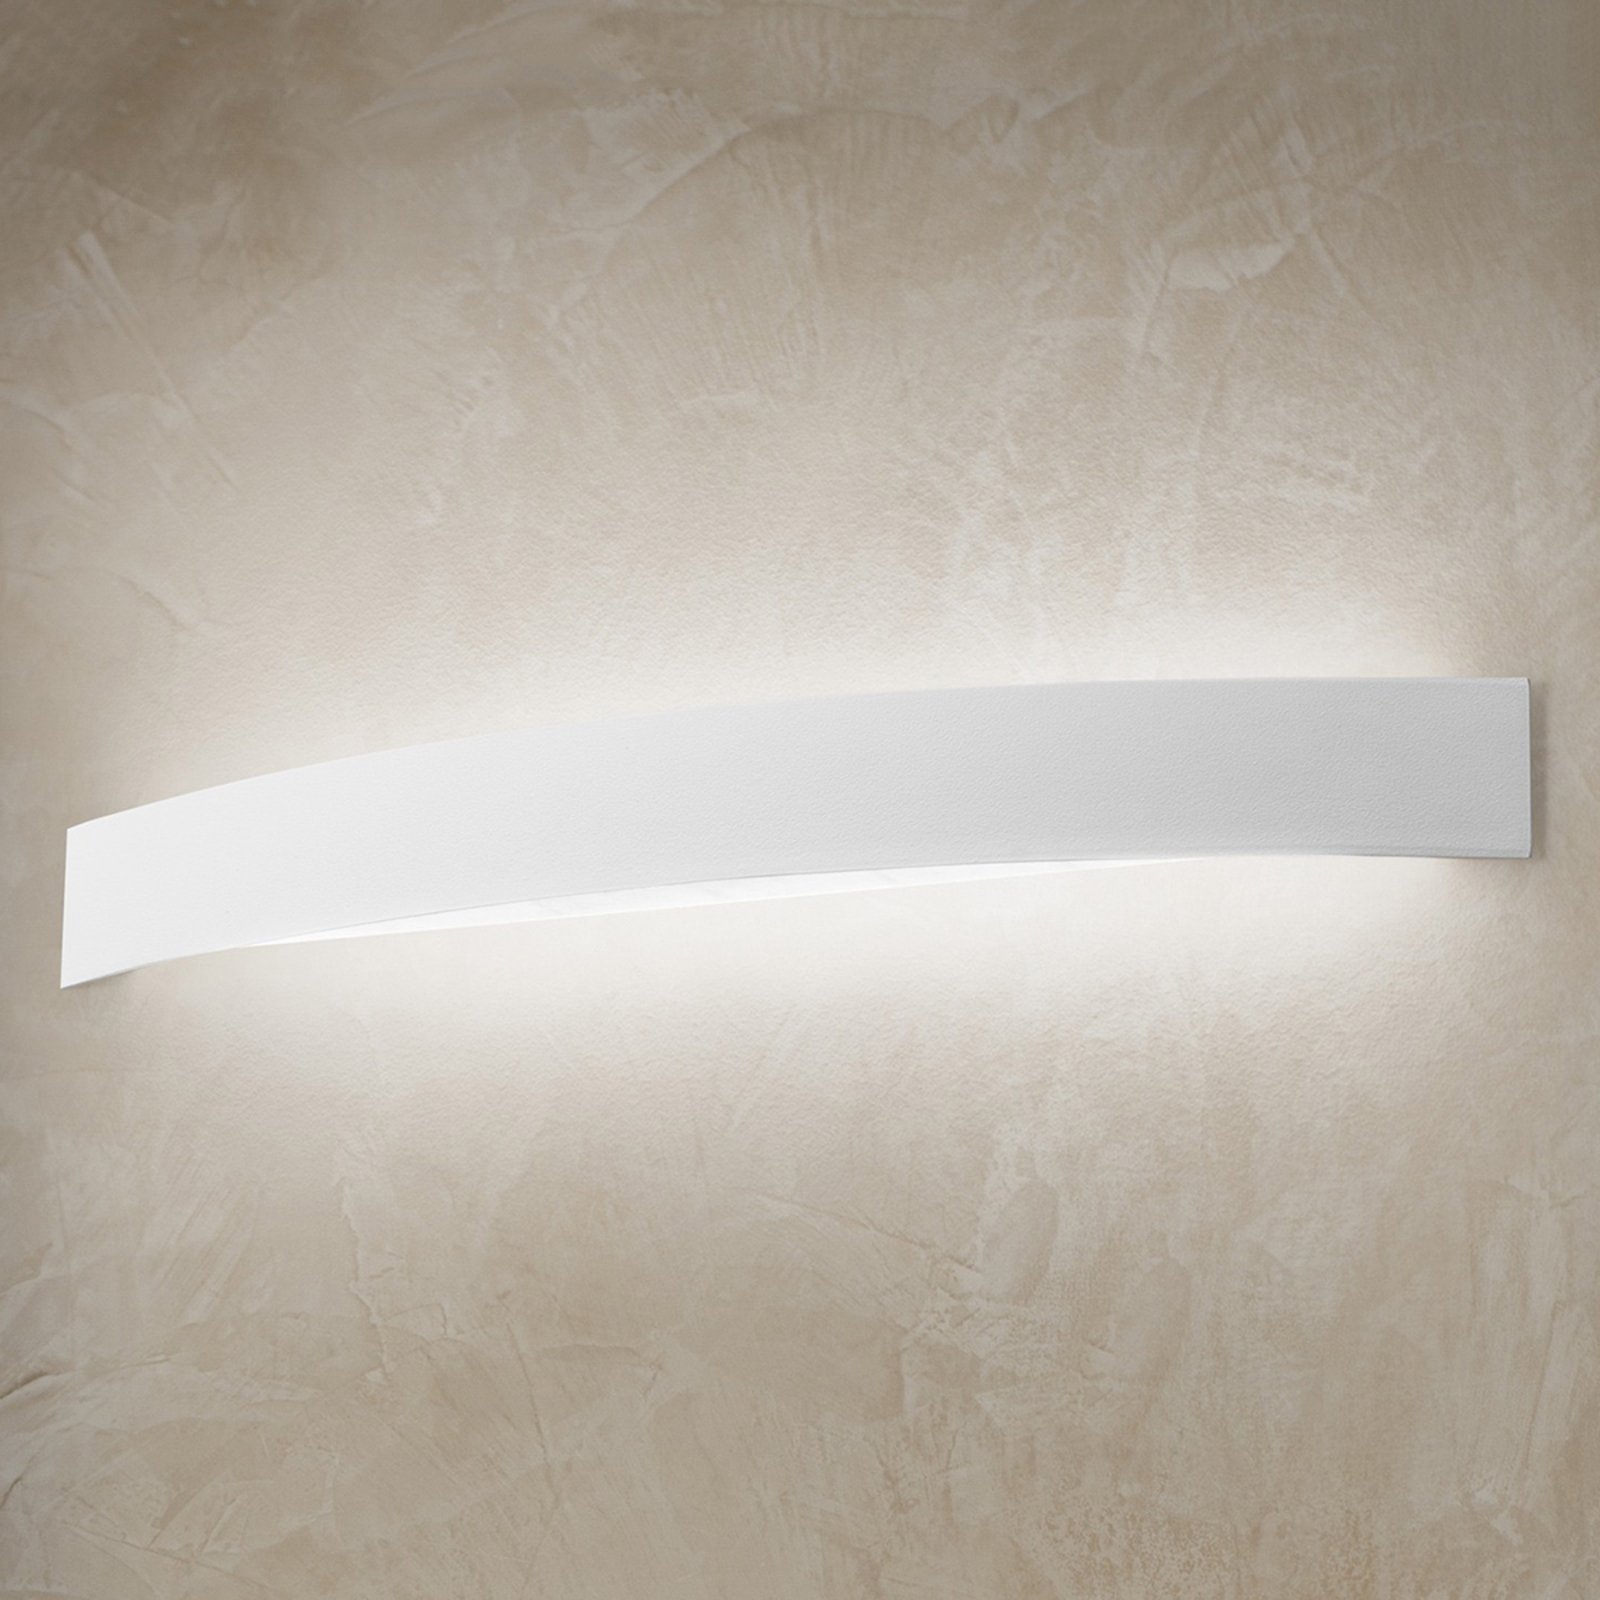 Curved Curve LED wall light in white